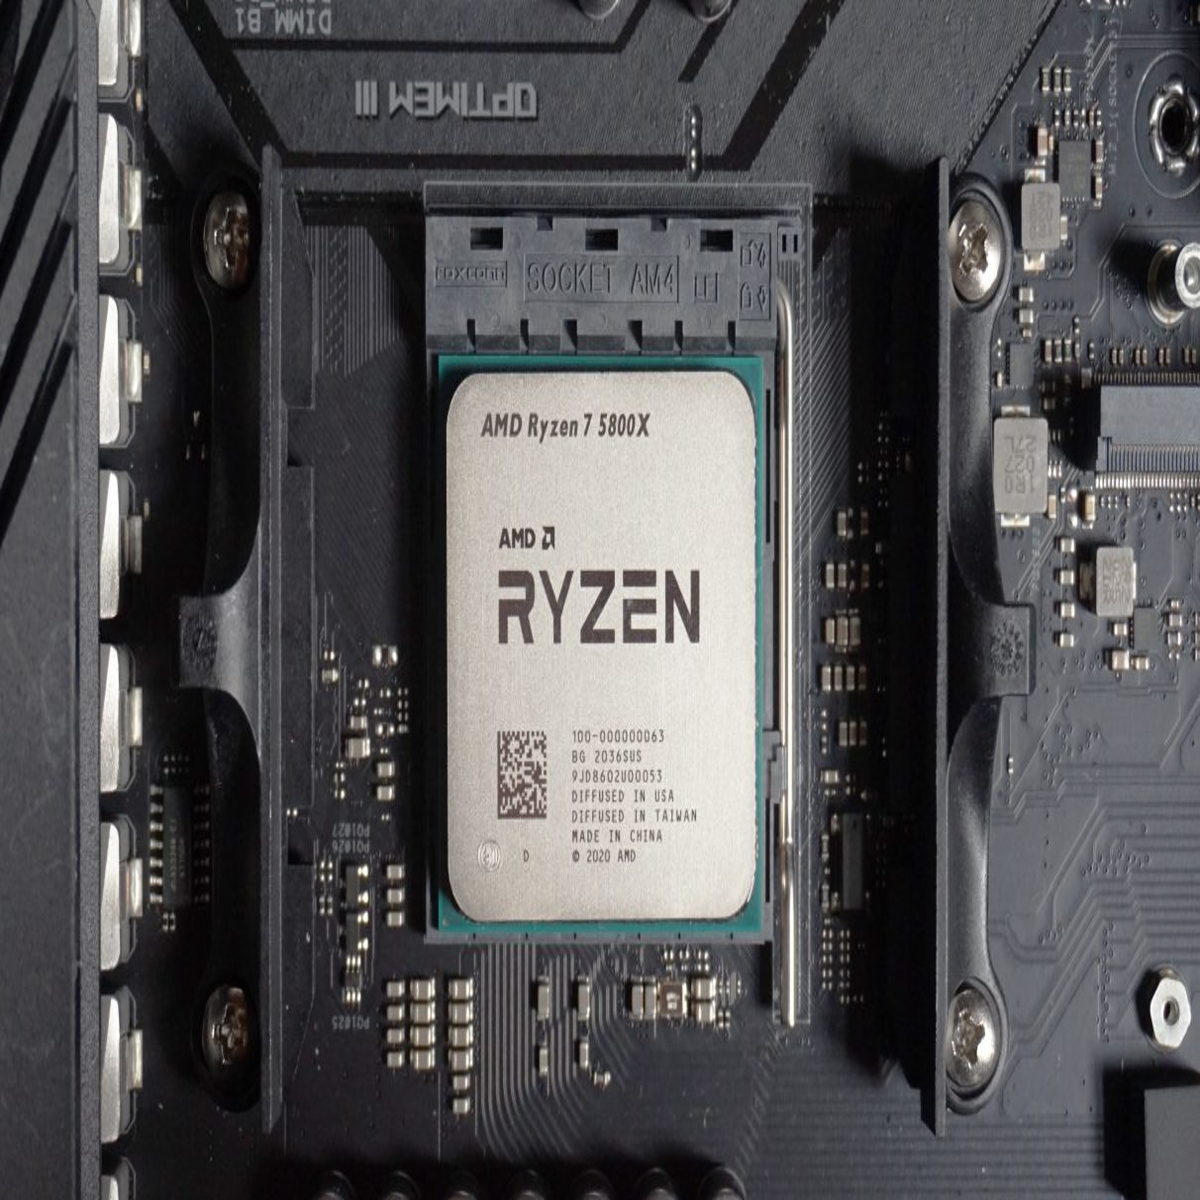 Black Friday is here, and you can save on AMD's powerful Ryzen 7 5800X CPU.